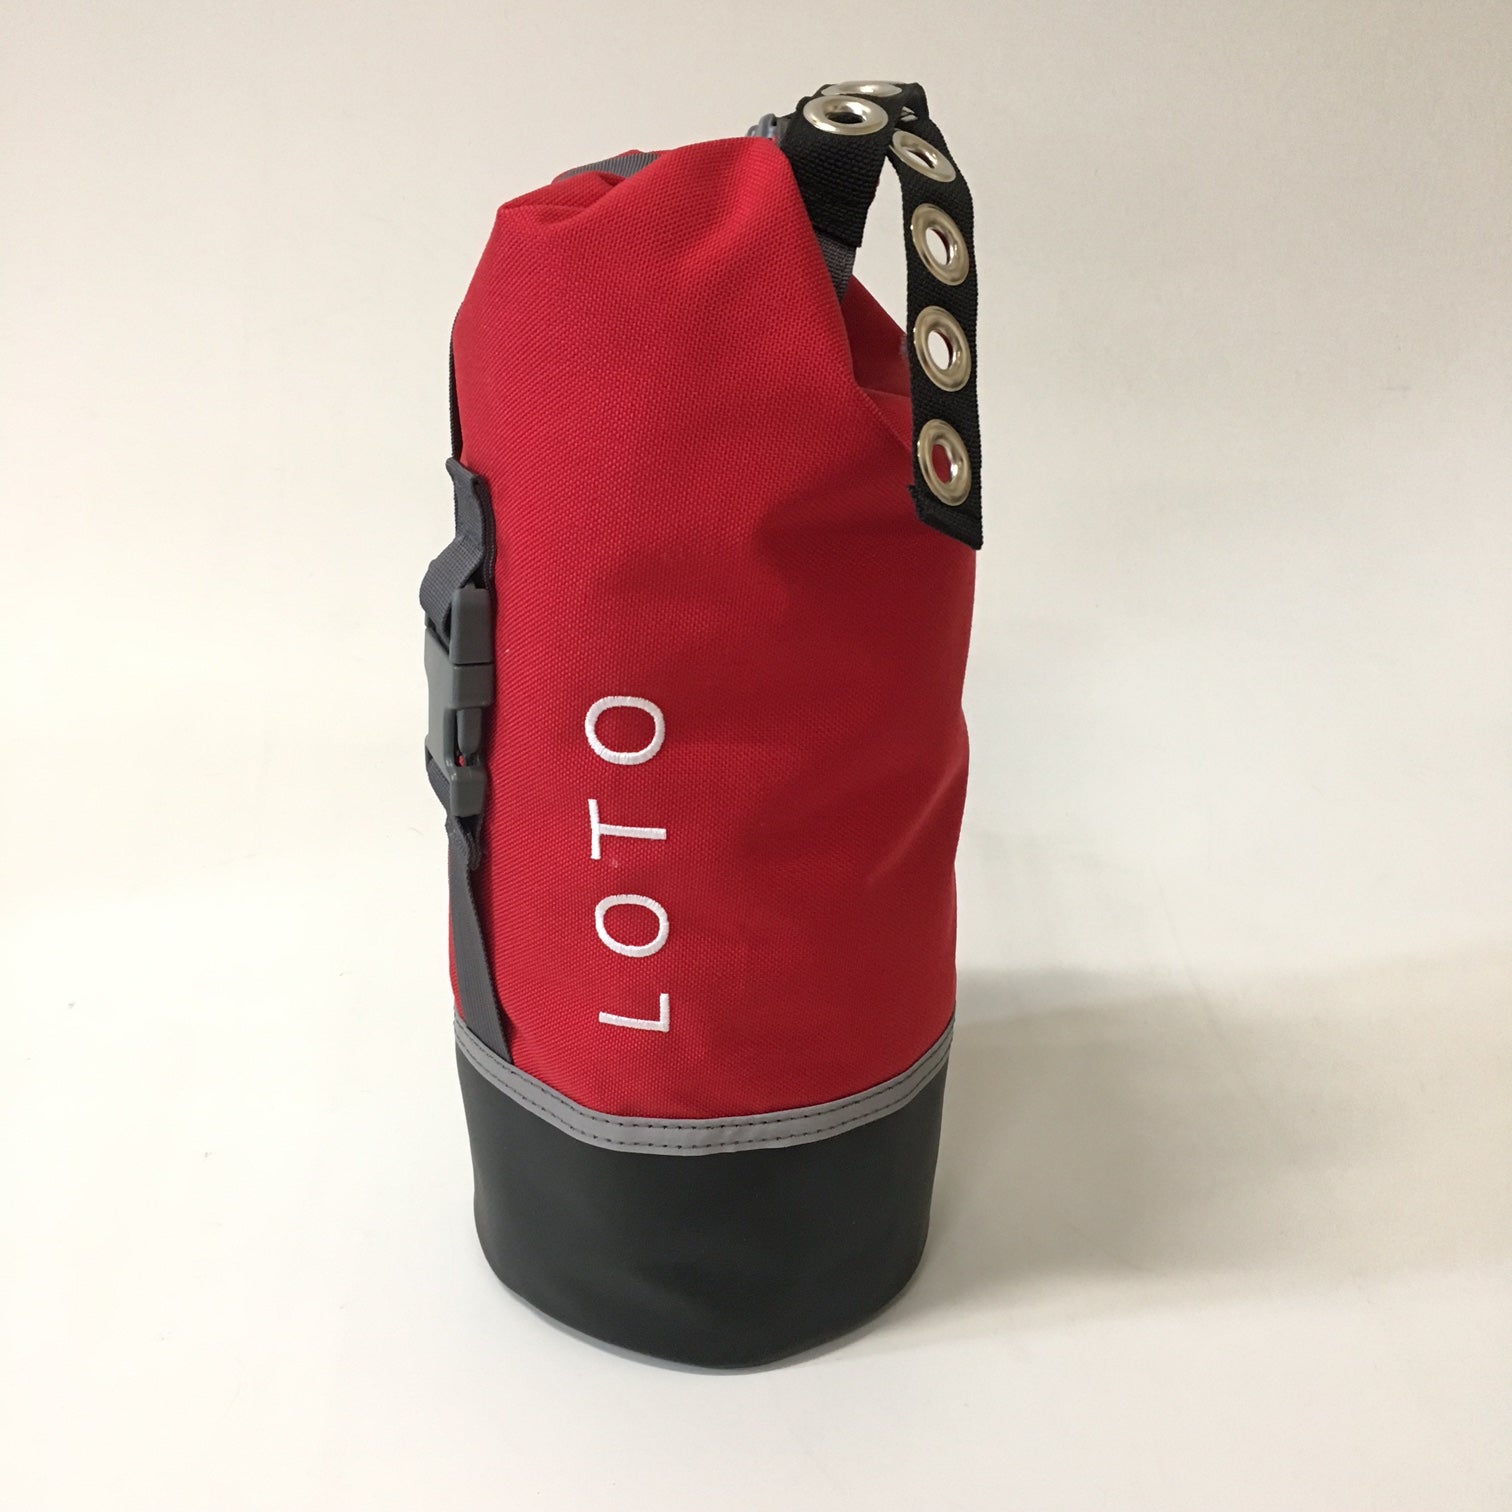 KRM LOTO – HANDY LOCKOUT ELECTRICIAN BAG /POUCH – RED